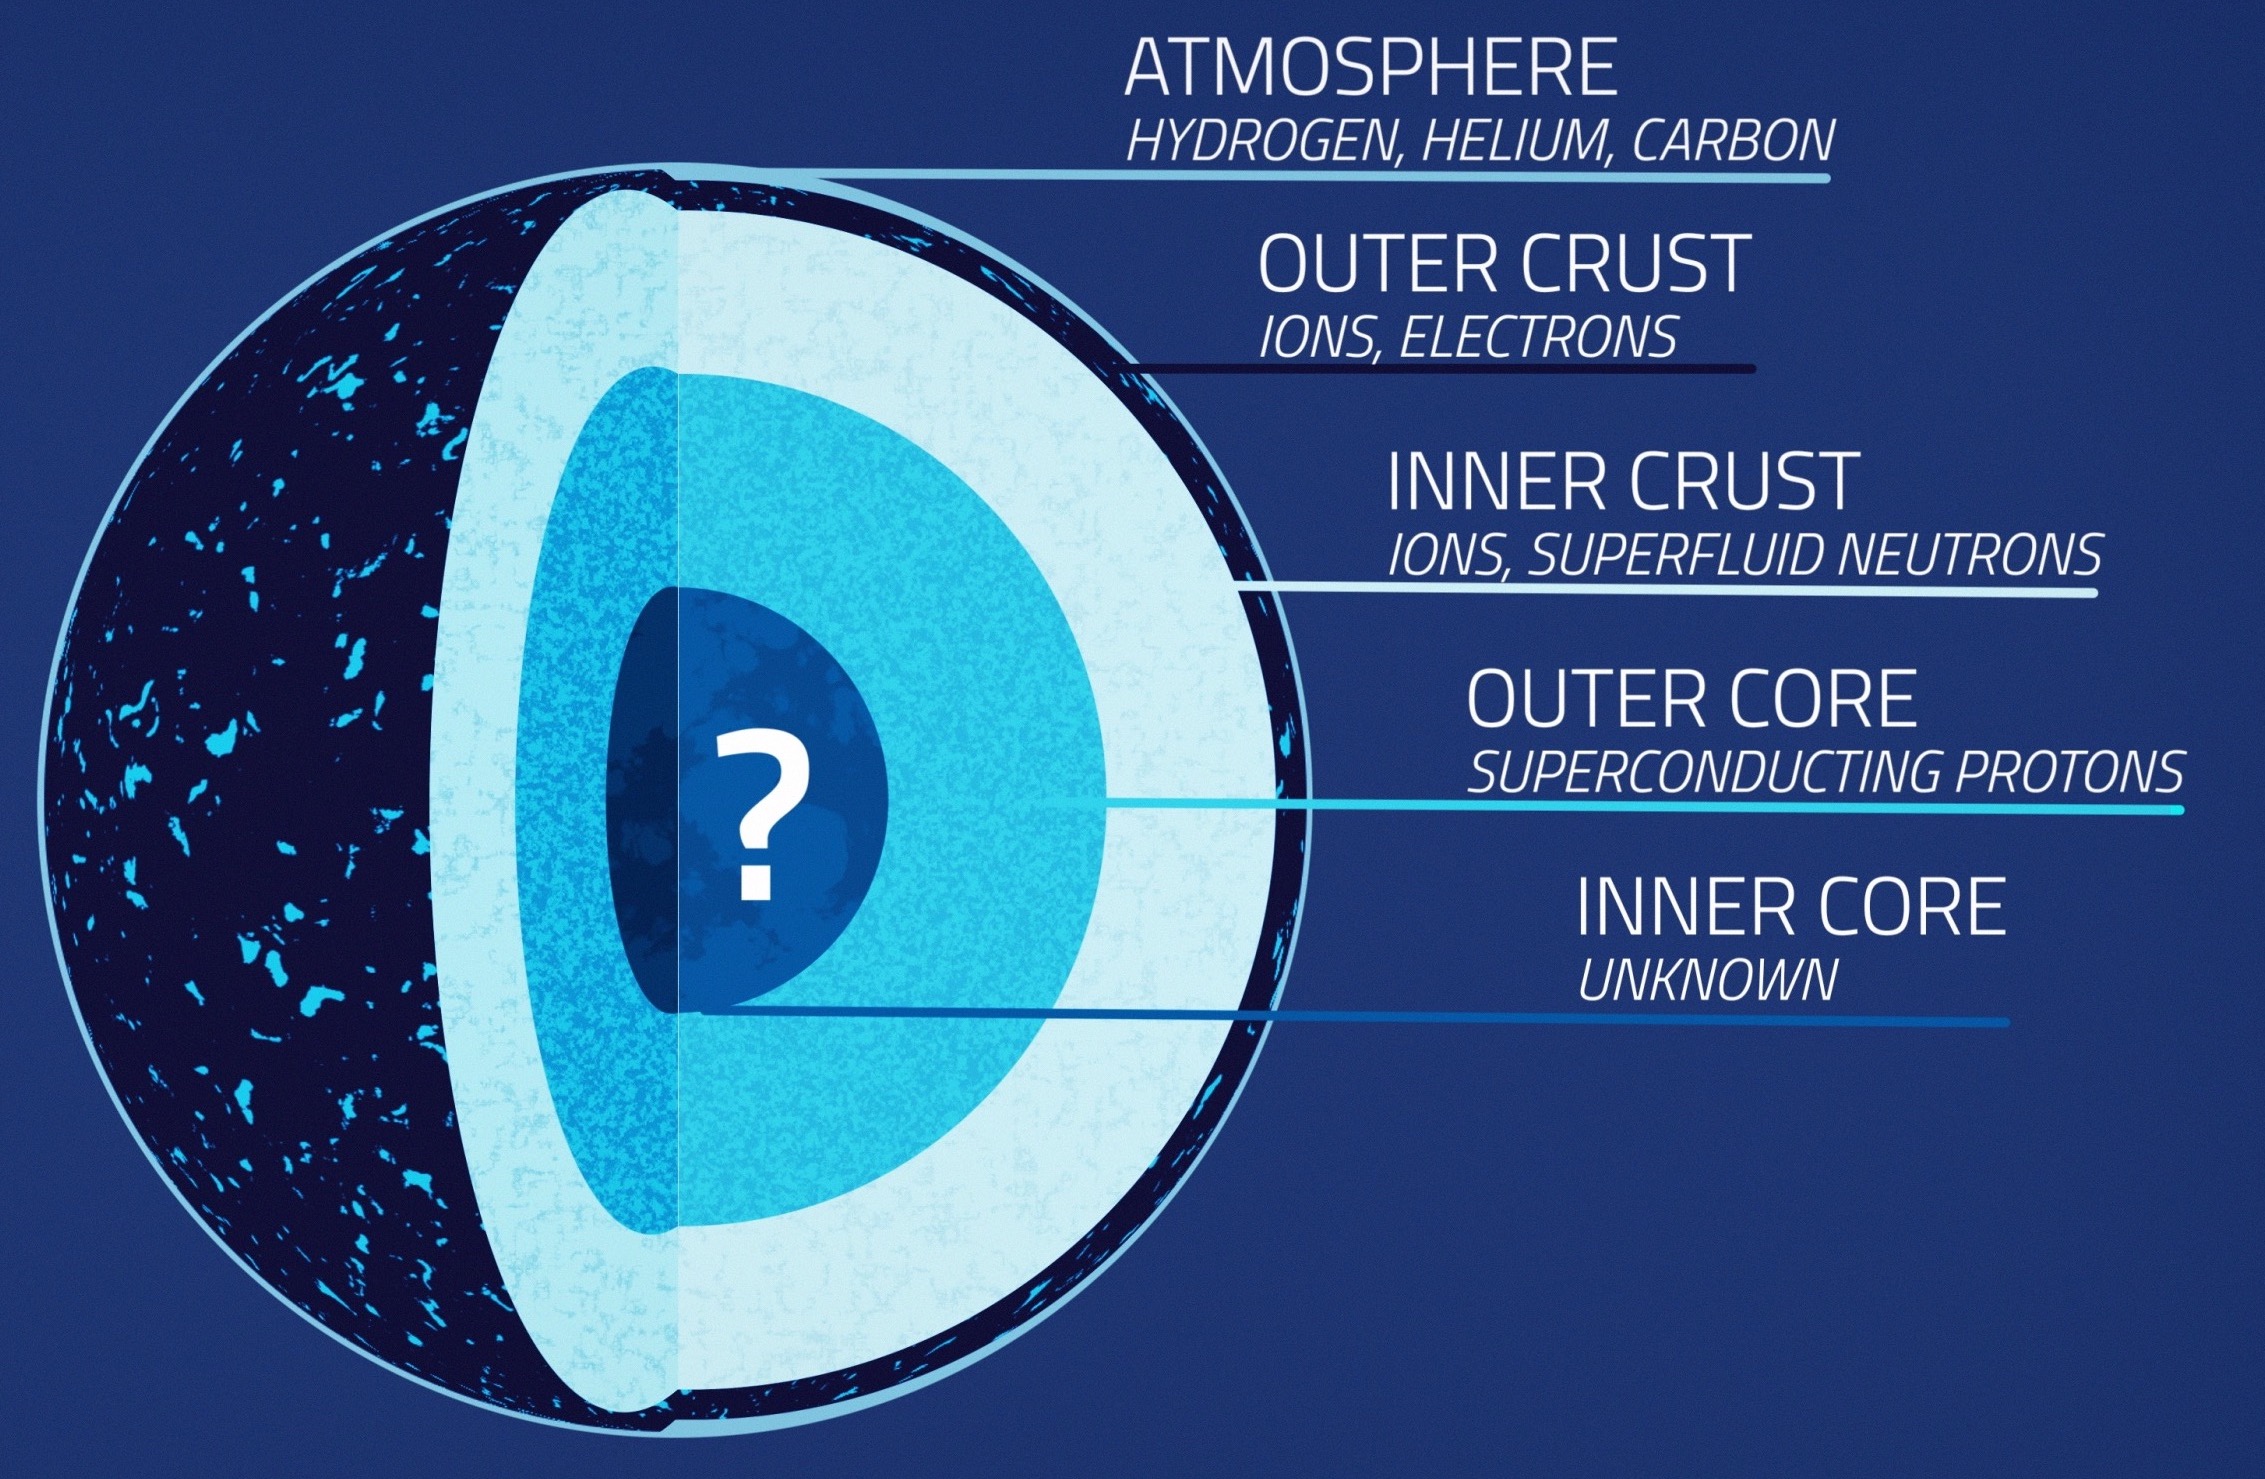 Scientists think neutron stars are layered. As shown in this illustration, the state of matter in their inner cores remains mysterious. Image Credit: NASA’s Goddard Space Flight Center/Conceptual Image Lab